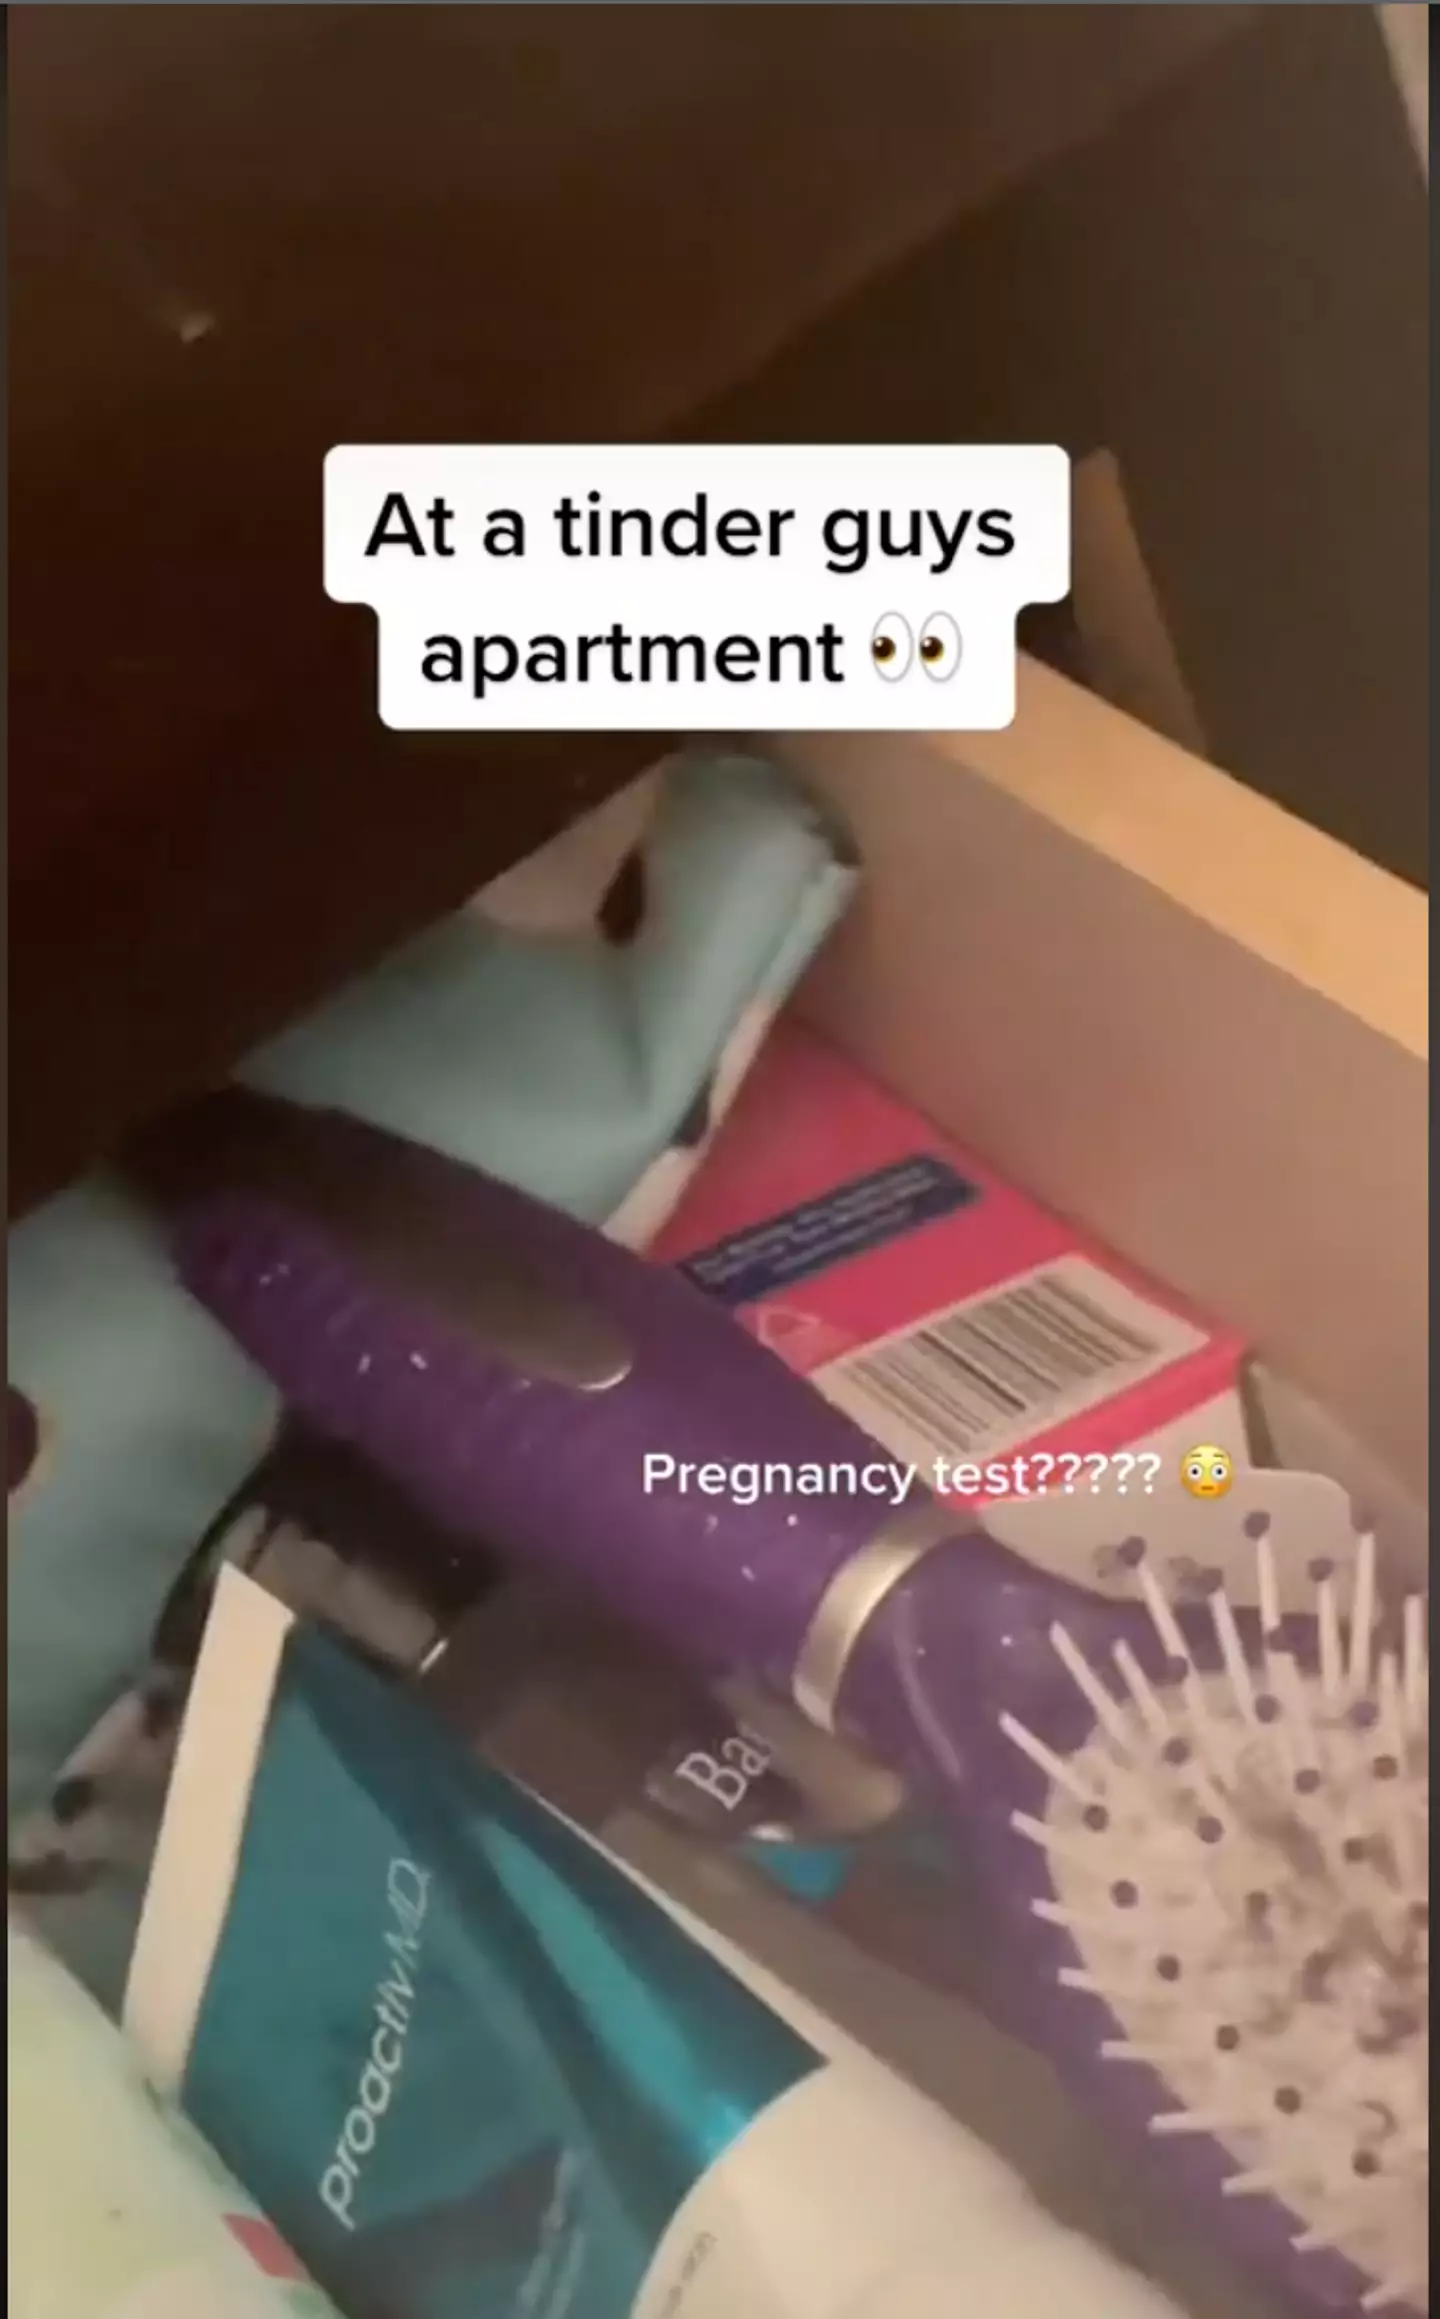 The alleged pregnancy test also suggested a woman living there (